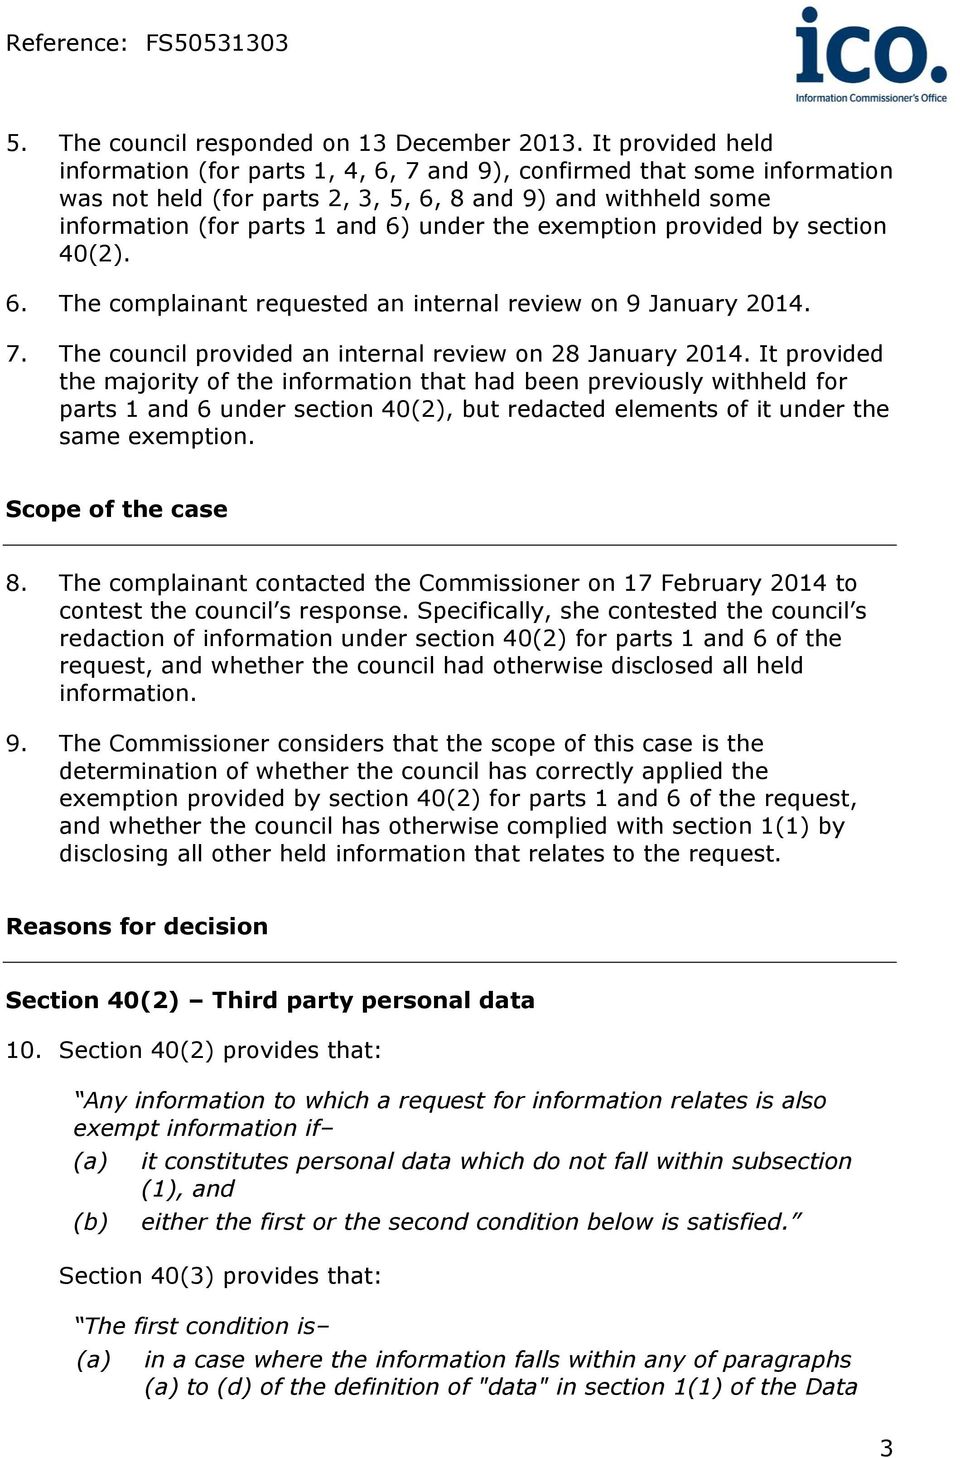 exemption provided by section 40(2). 6. The complainant requested an internal review on 9 January 2014. 7. The council provided an internal review on 28 January 2014.